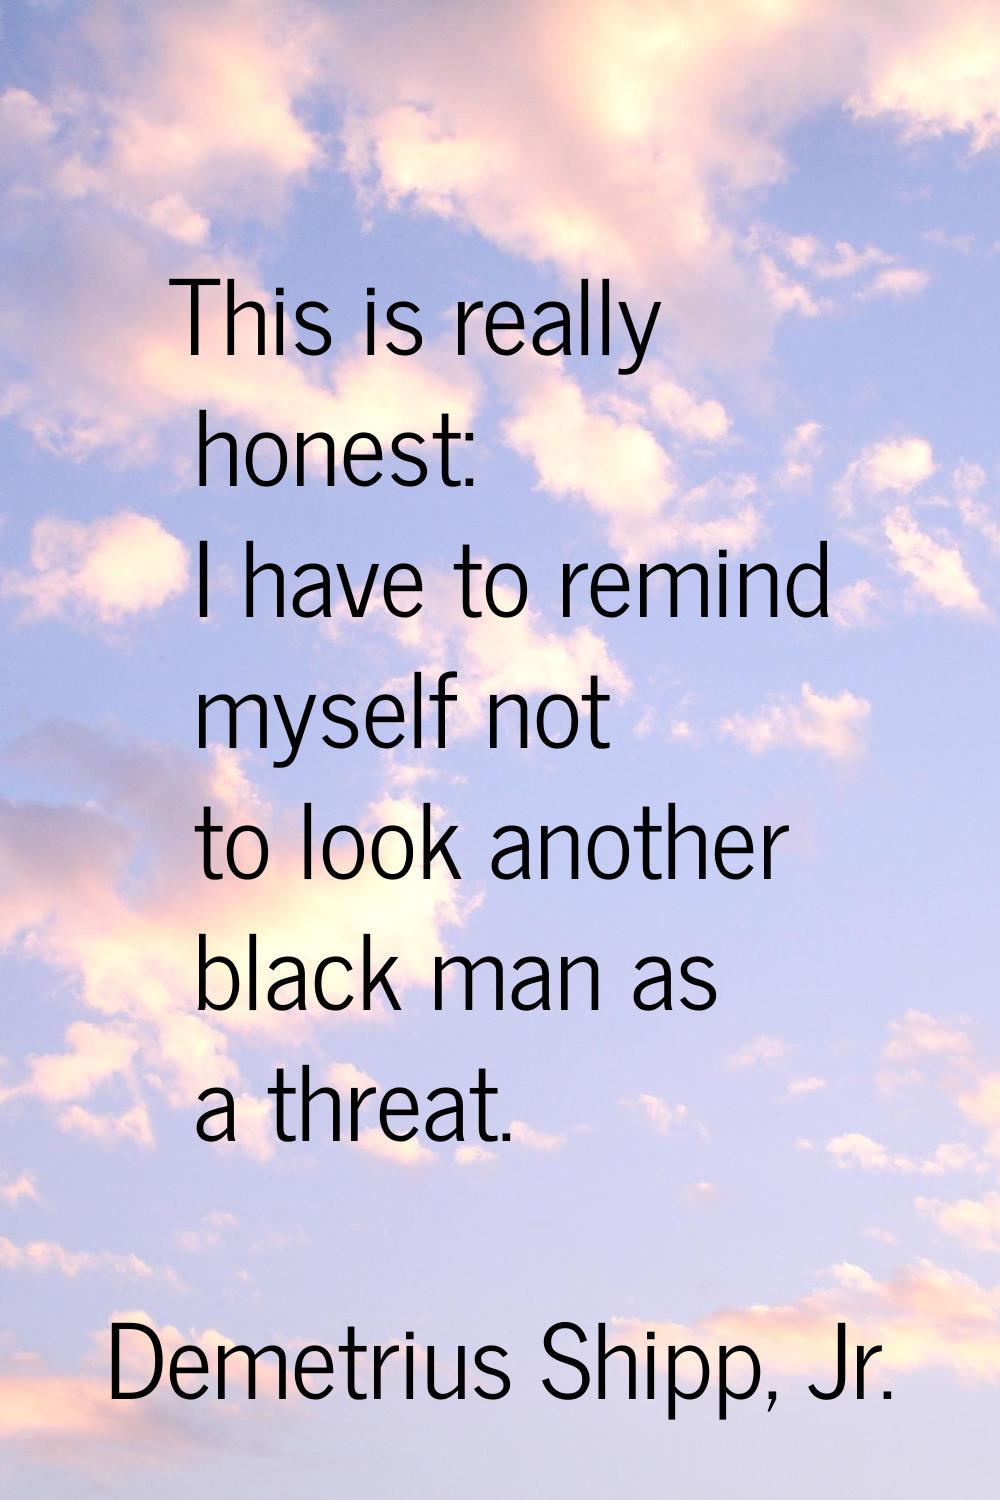 This is really honest: I have to remind myself not to look another black man as a threat.